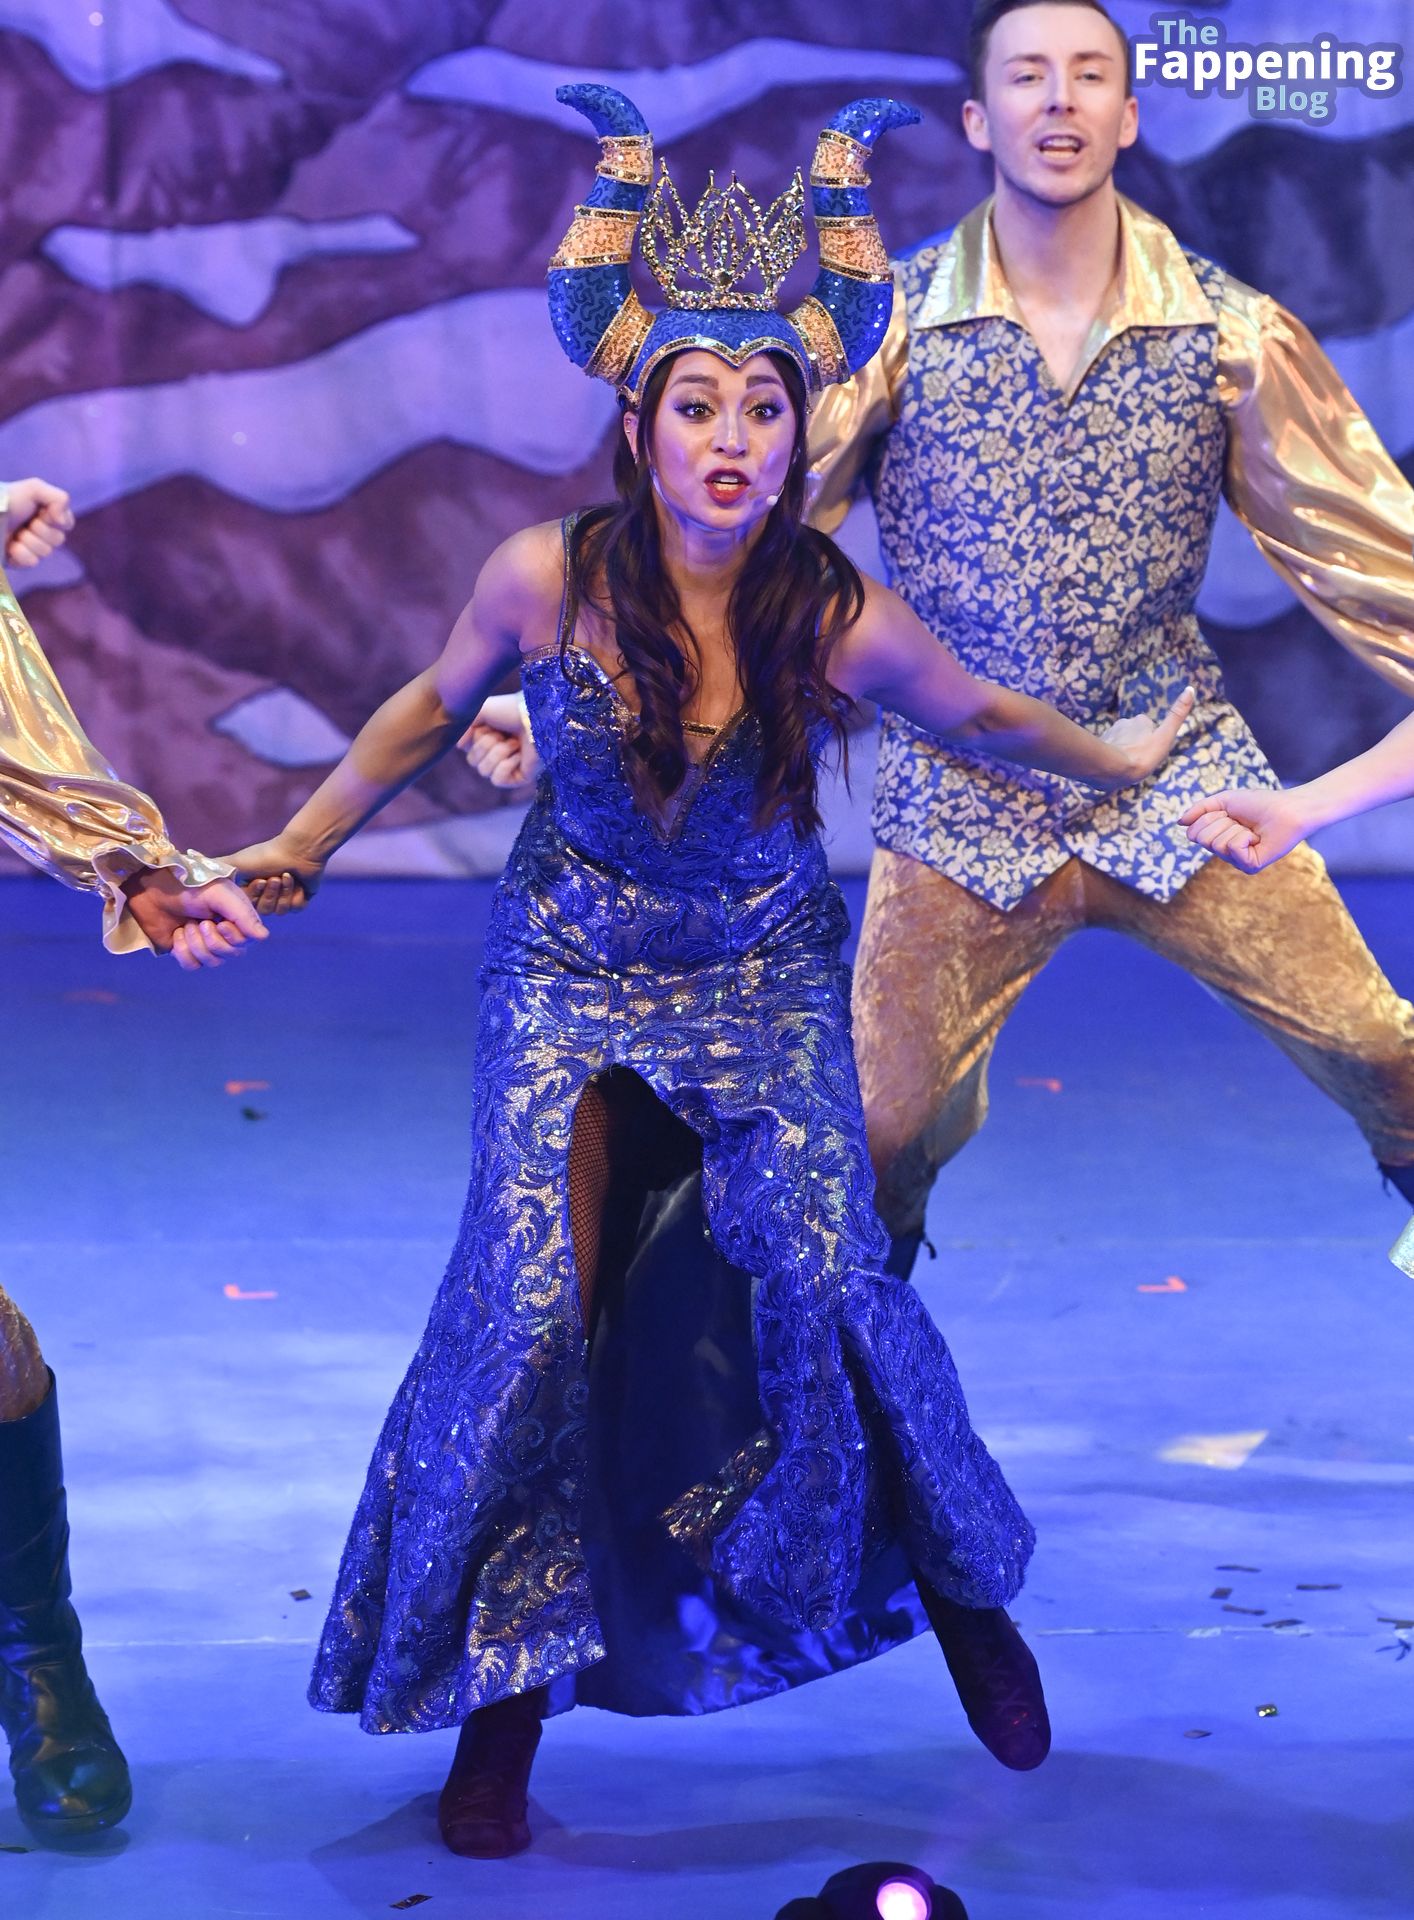 Katya Jones Puts on a Very Animated Display as ‘The Evil Queen’ in “Snow White” Panto in Manchester (Photos)